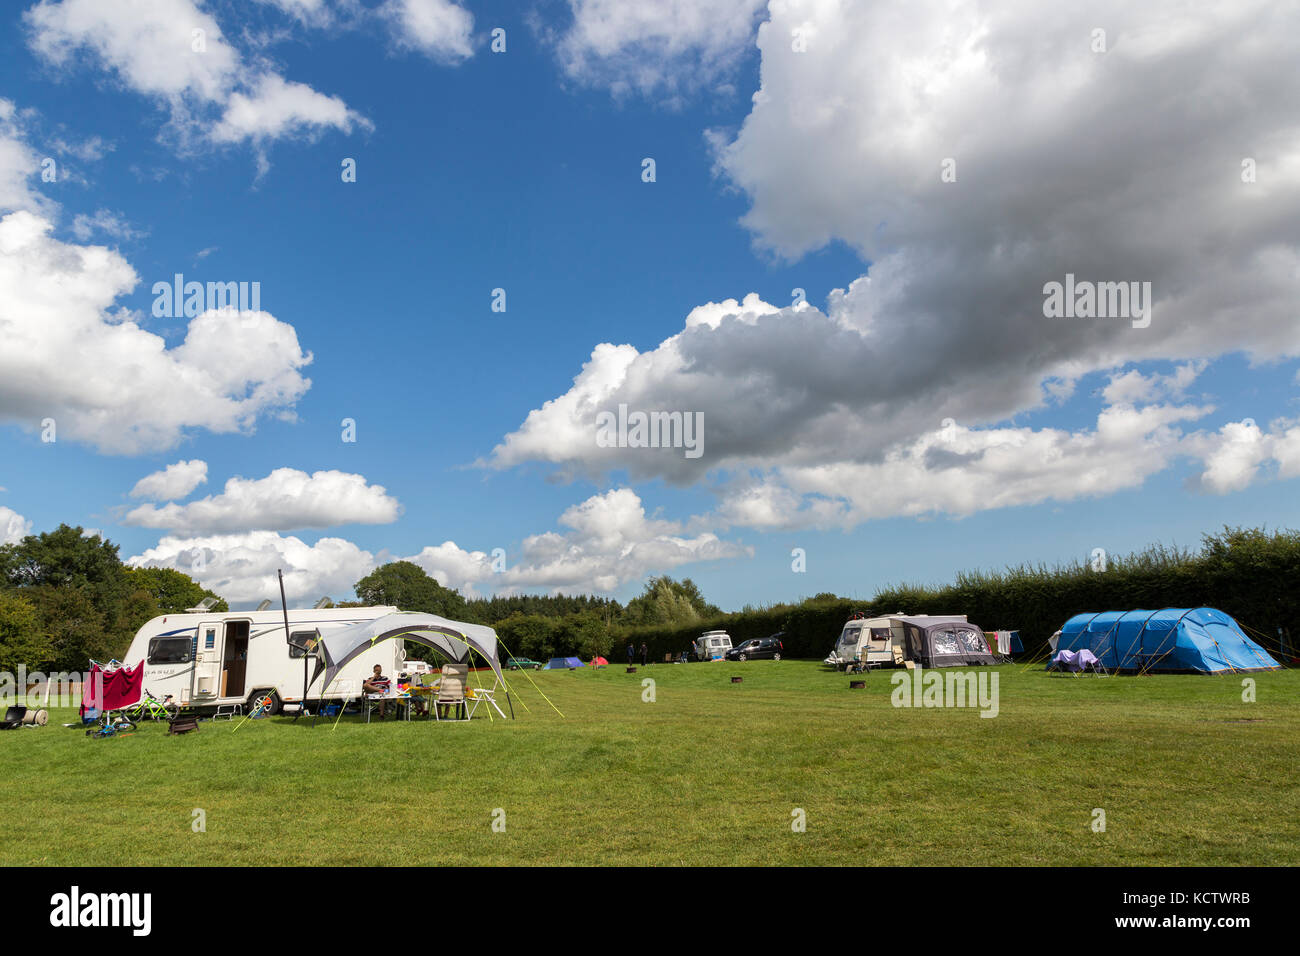 Caravans and tents on campsite, Wales, UK Stock Photo